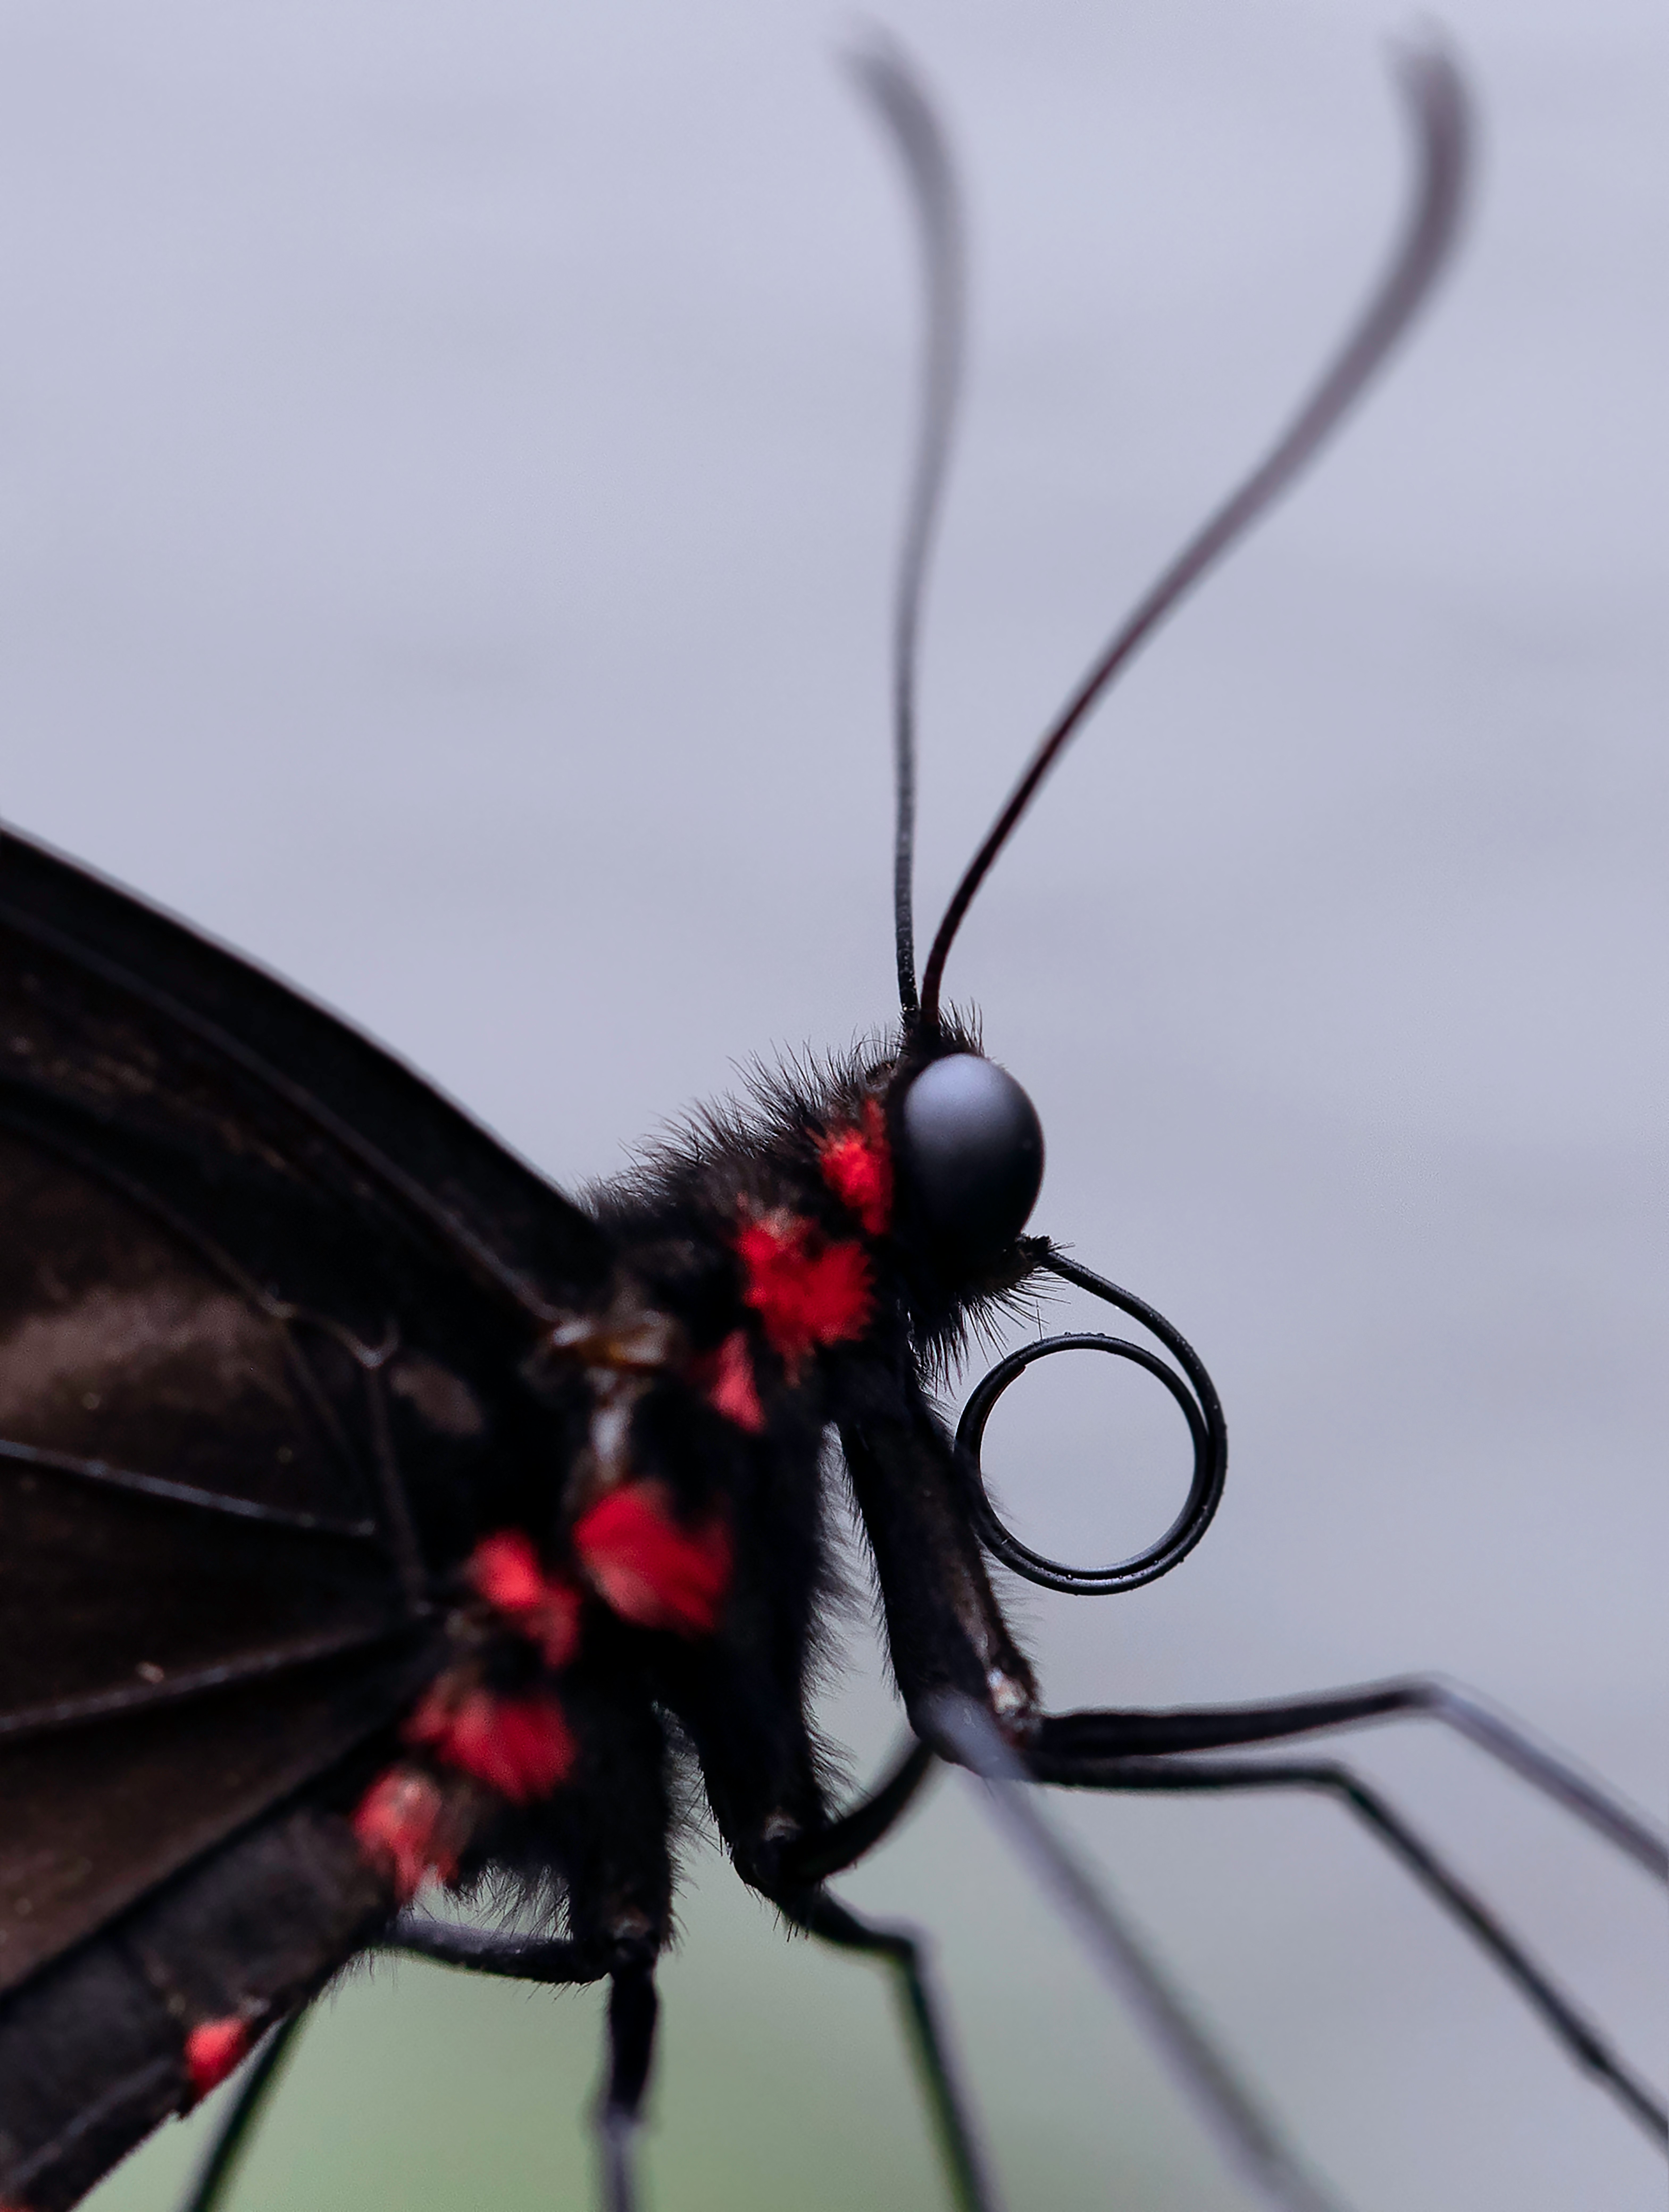 black and red butterfly perched on white flower in close up photography during daytime